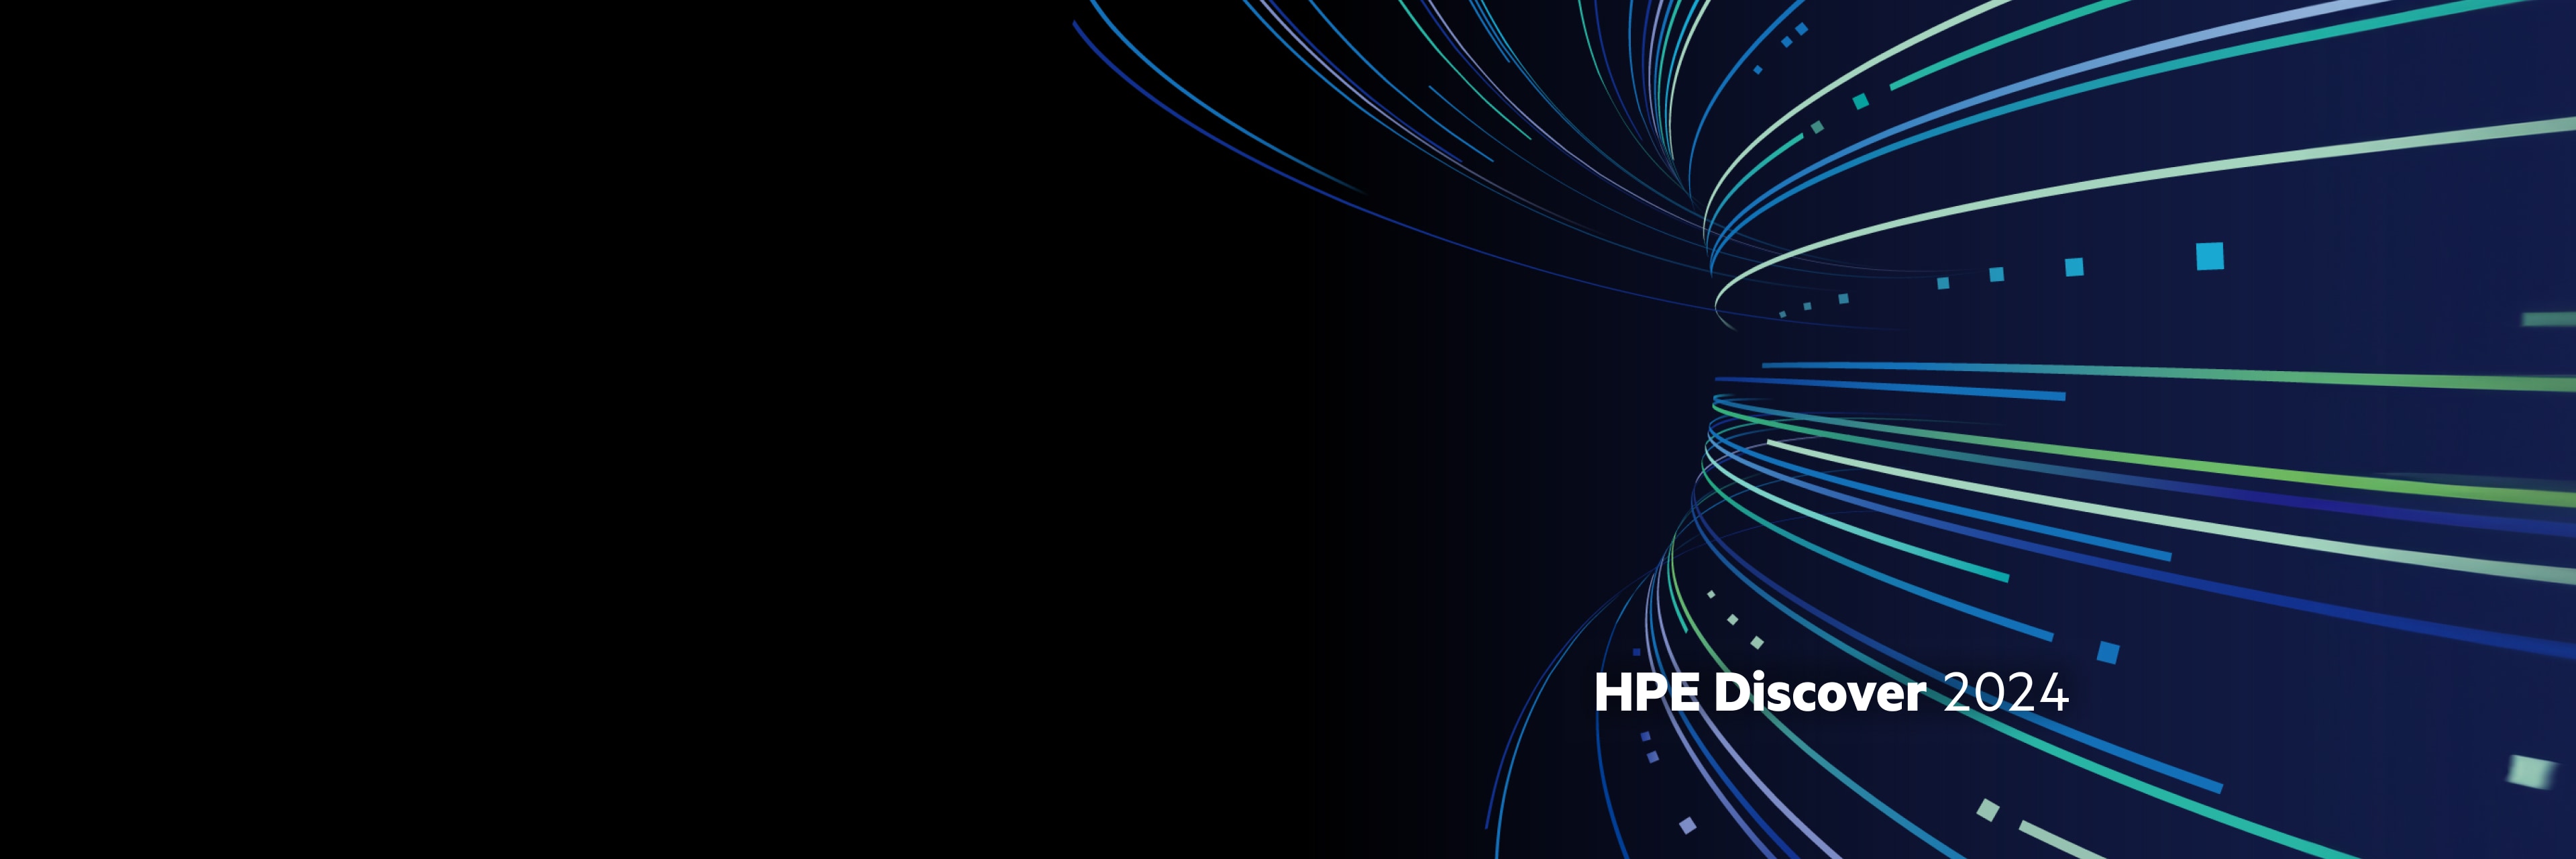 banner image for HPE Discover 2024